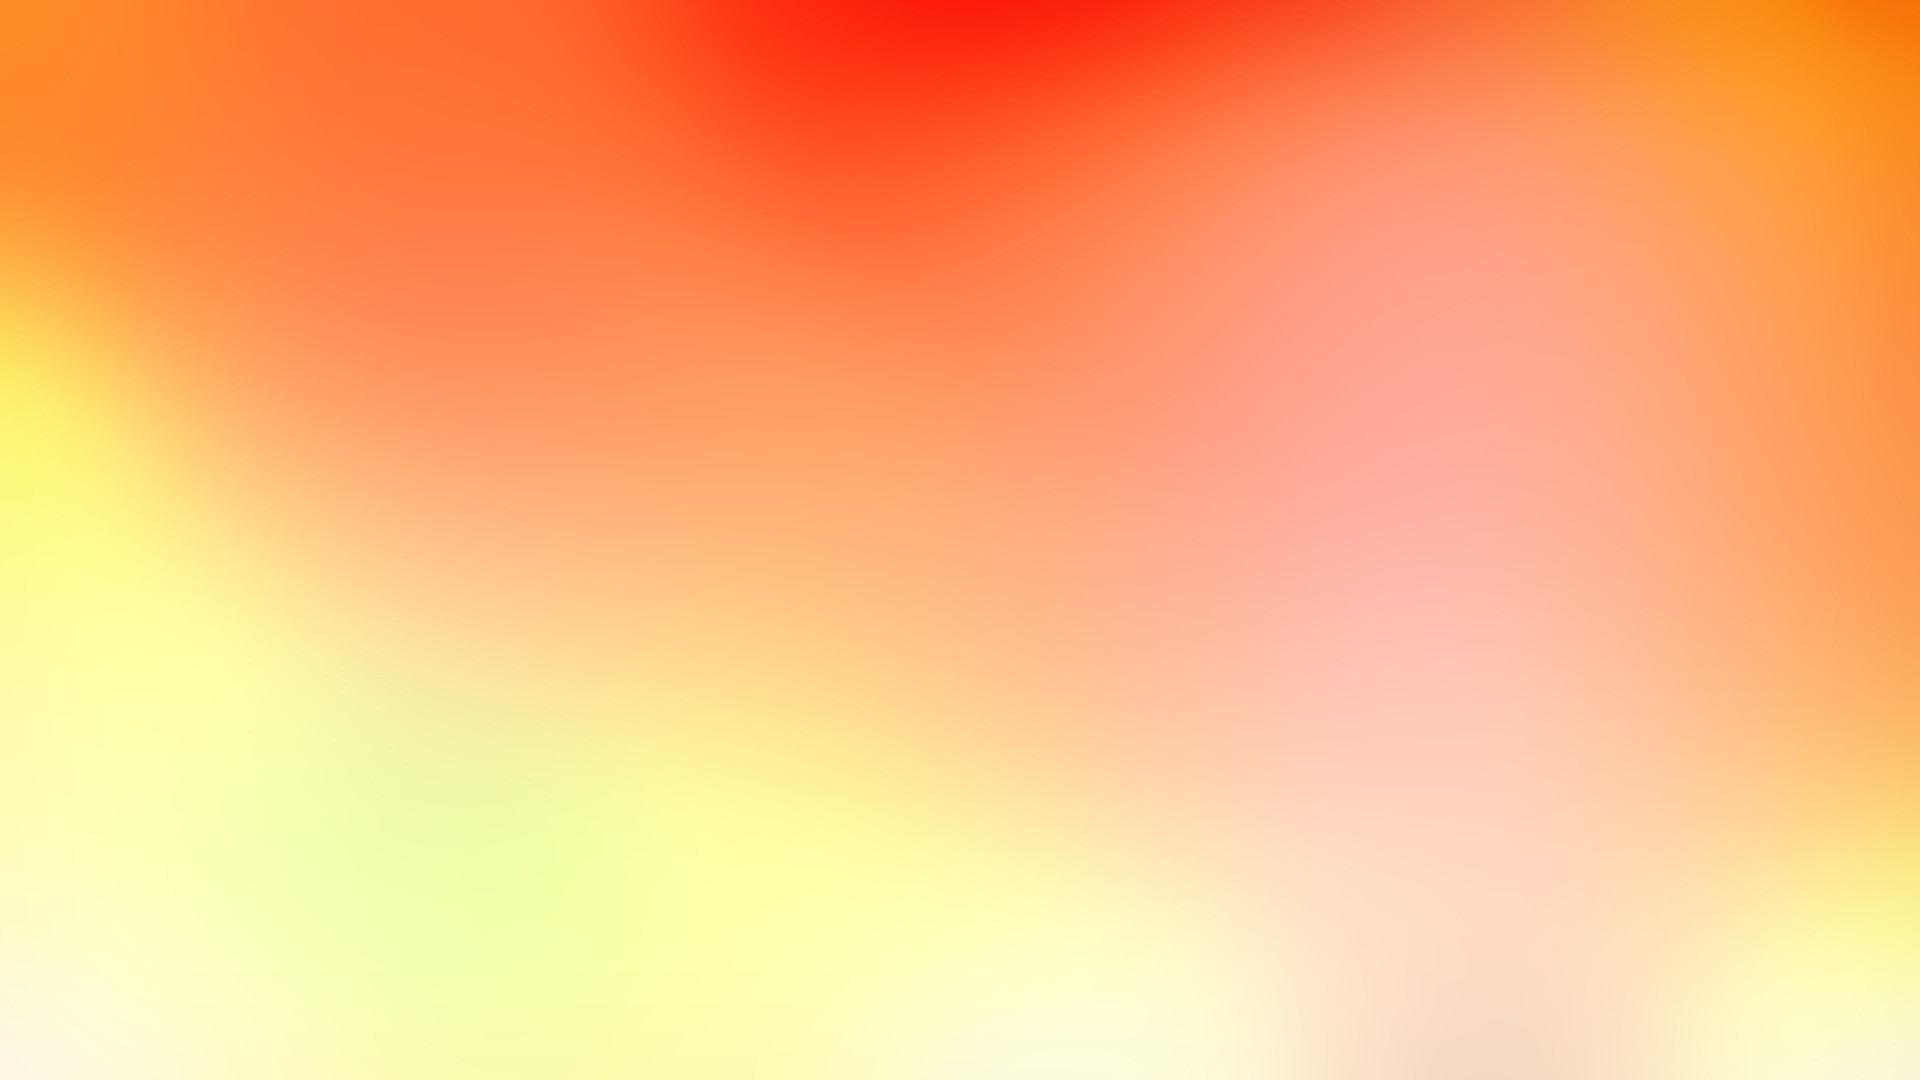 1920x1080 abstract, Colorful, Warm colors, Blurred, Soft gradient